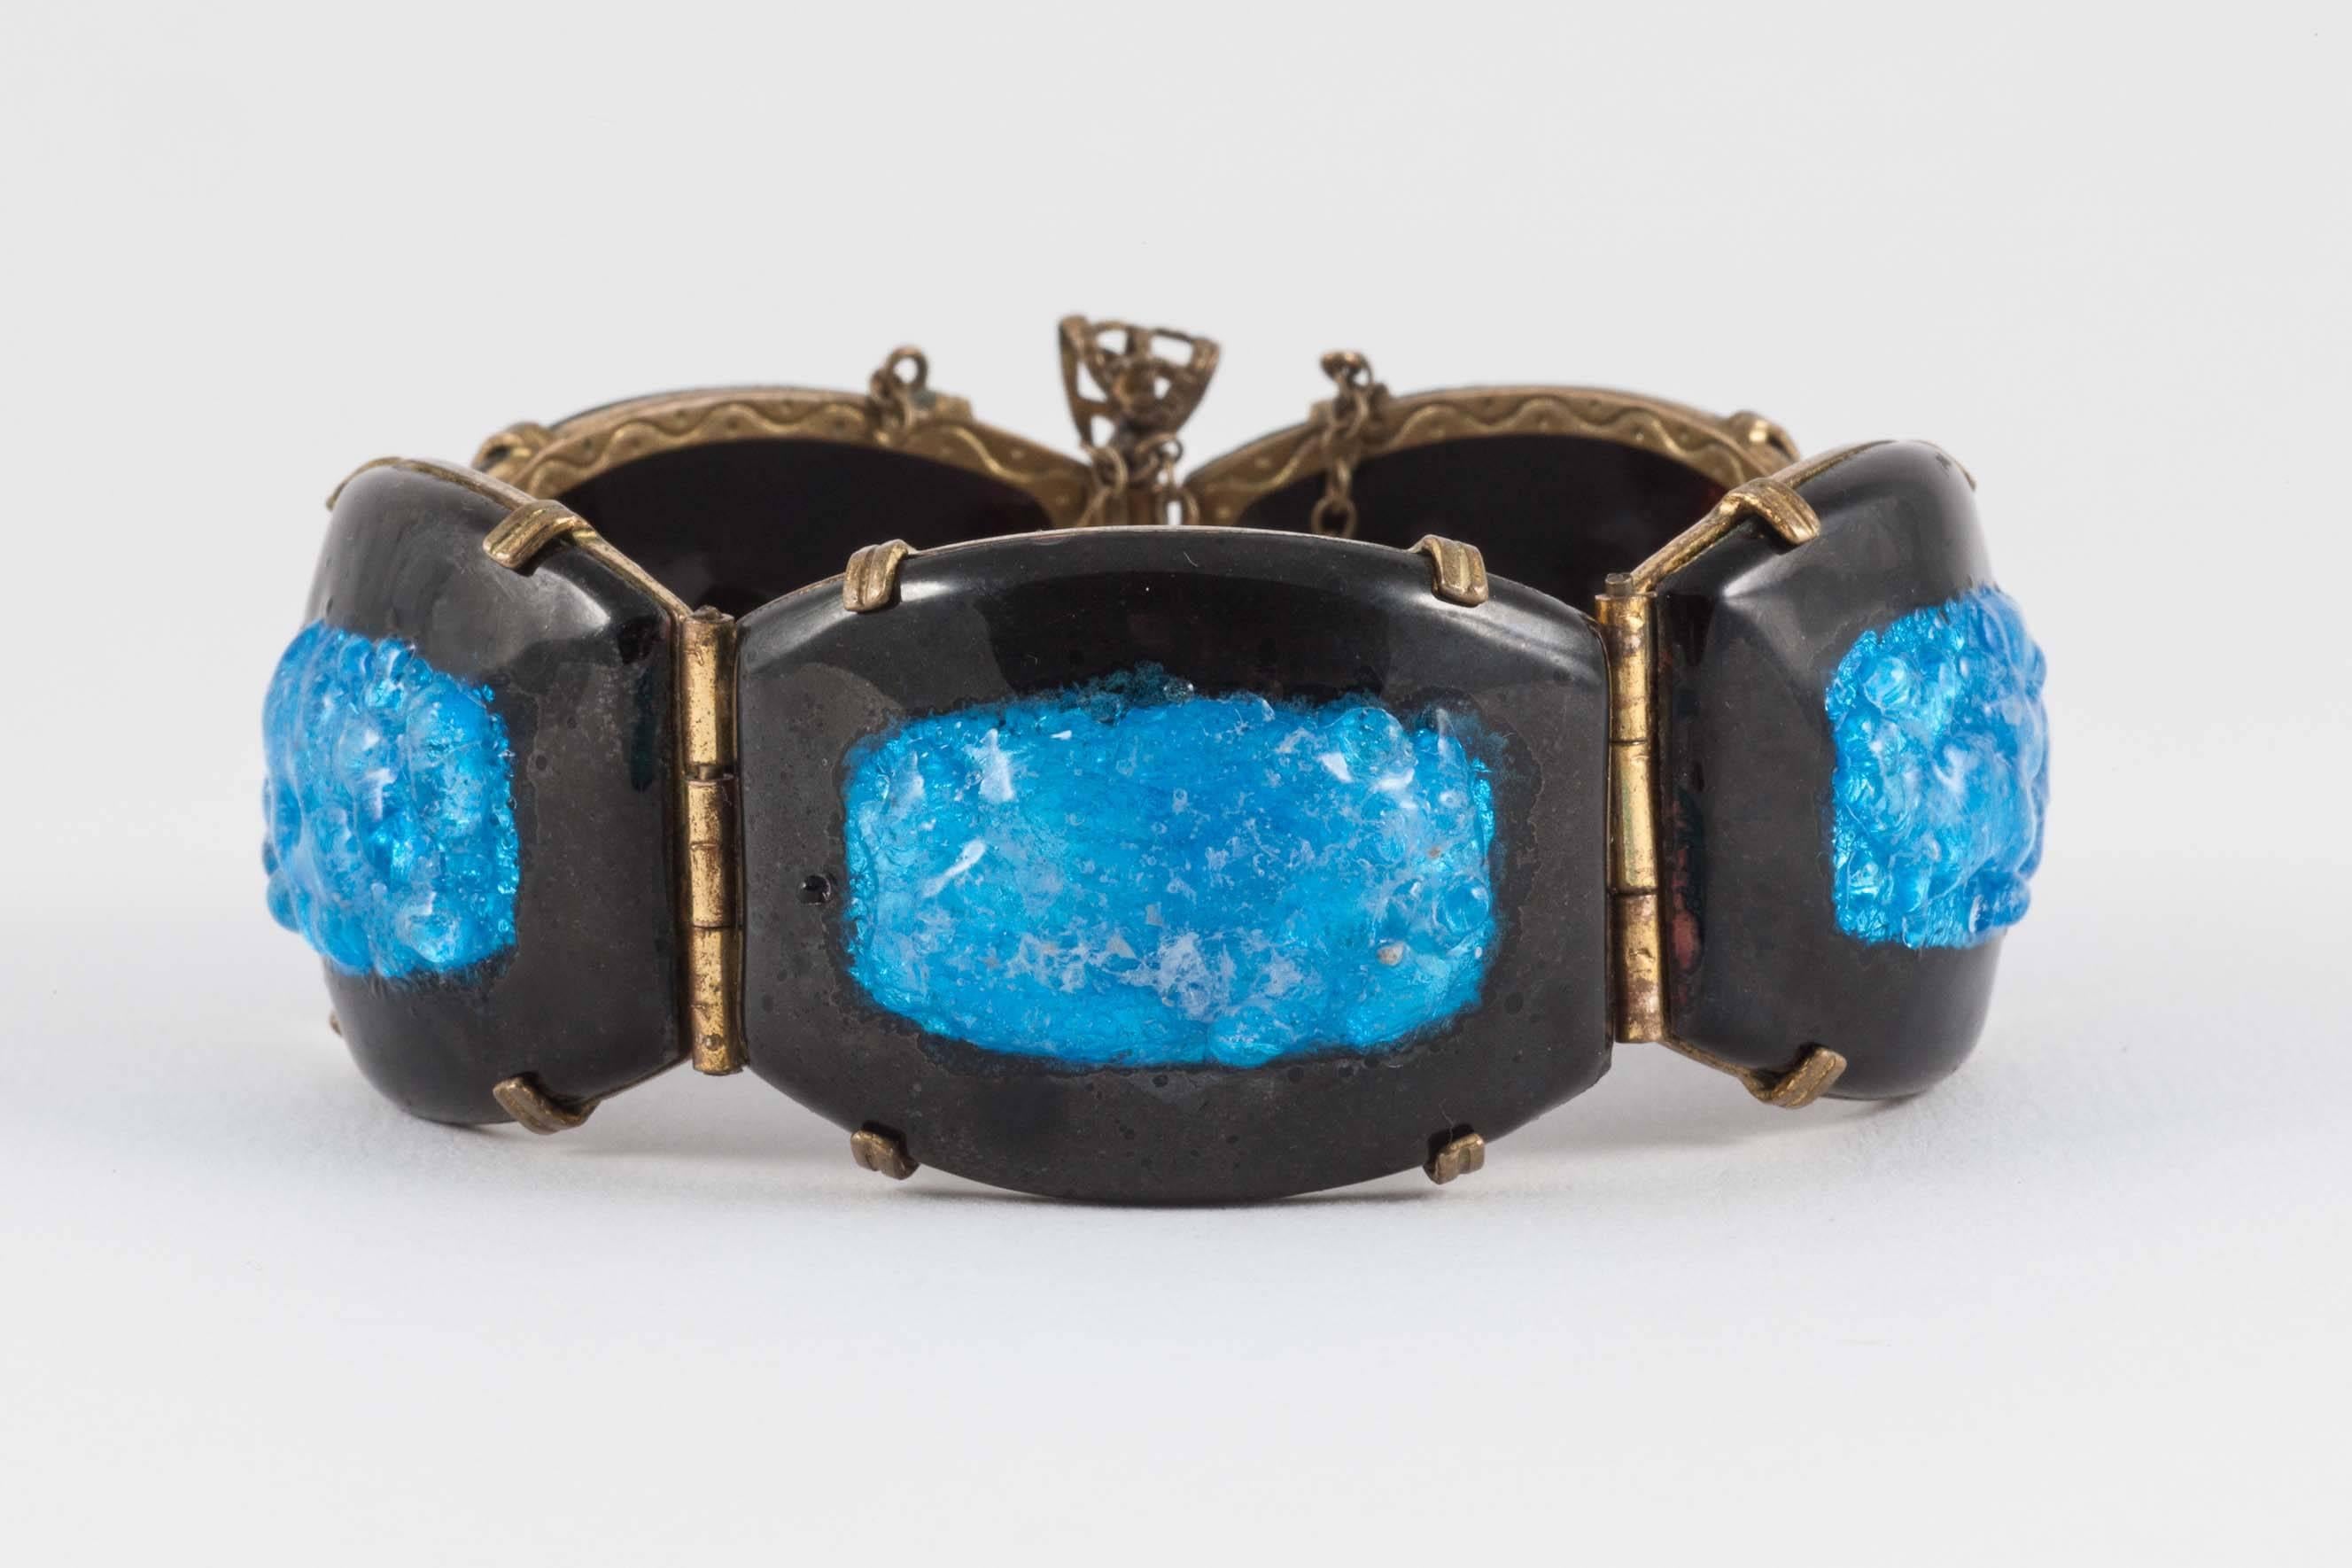 This is a lovely example of 1960s Limoges pate de verre. Enameled curved copper lozenges are hinged together with engraved brass hinged mounts.The turquoise centres have a lovely deep glow due to the technique. It sits comfortably on the wrist and